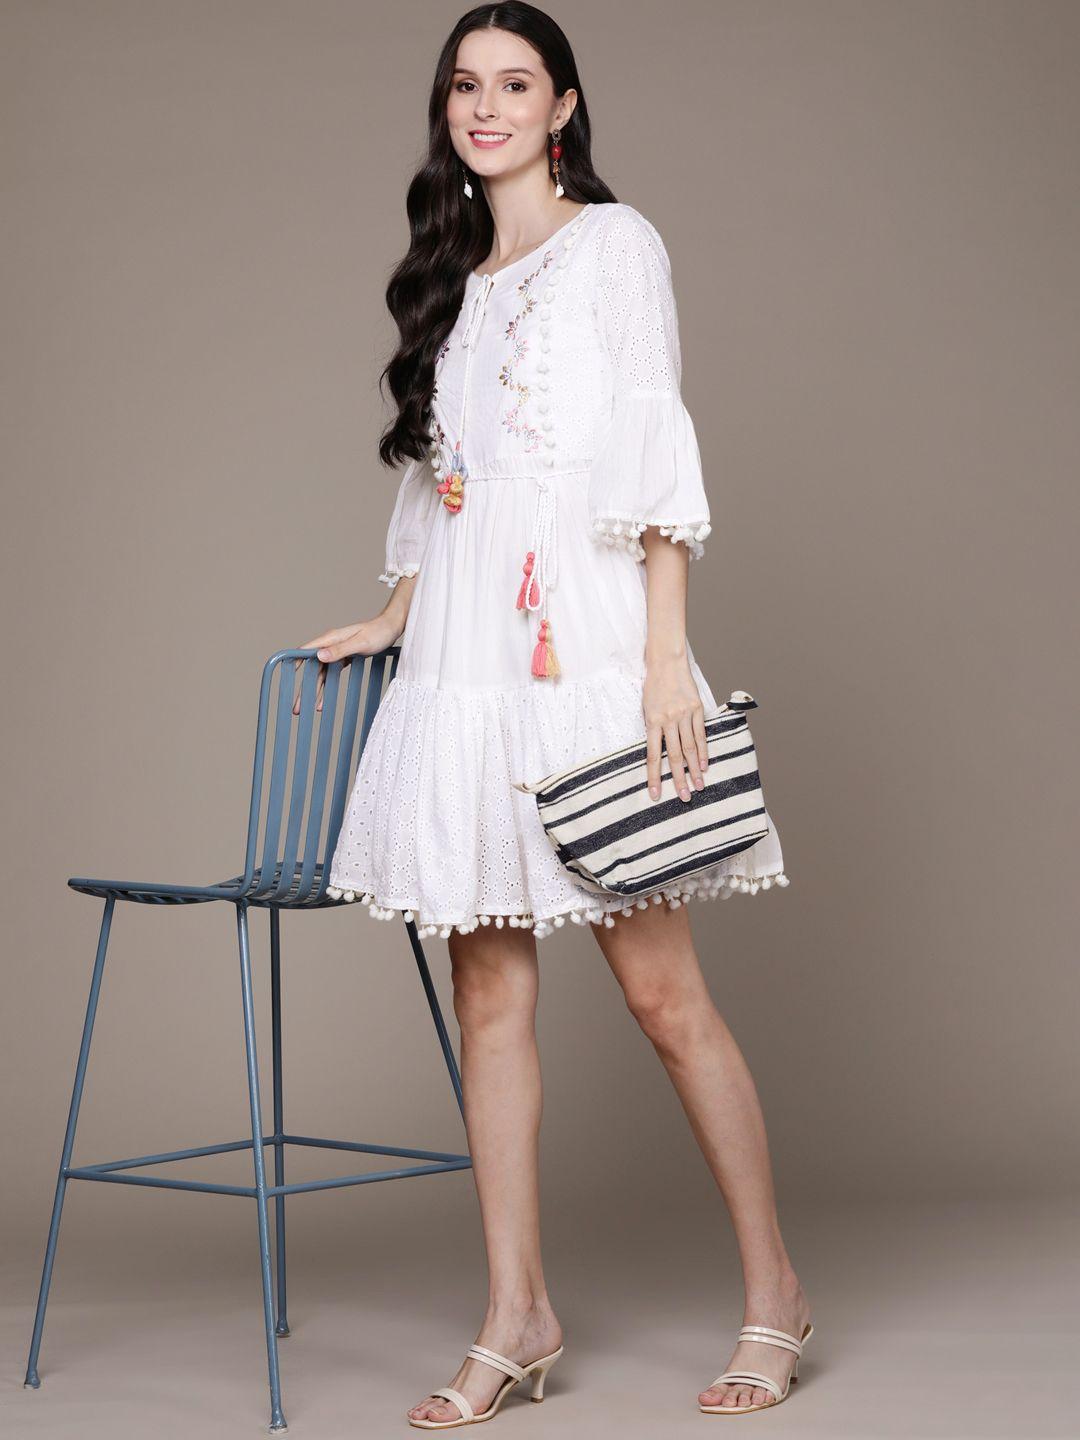 ishin white floral embroidered tie-up neck a-line dress